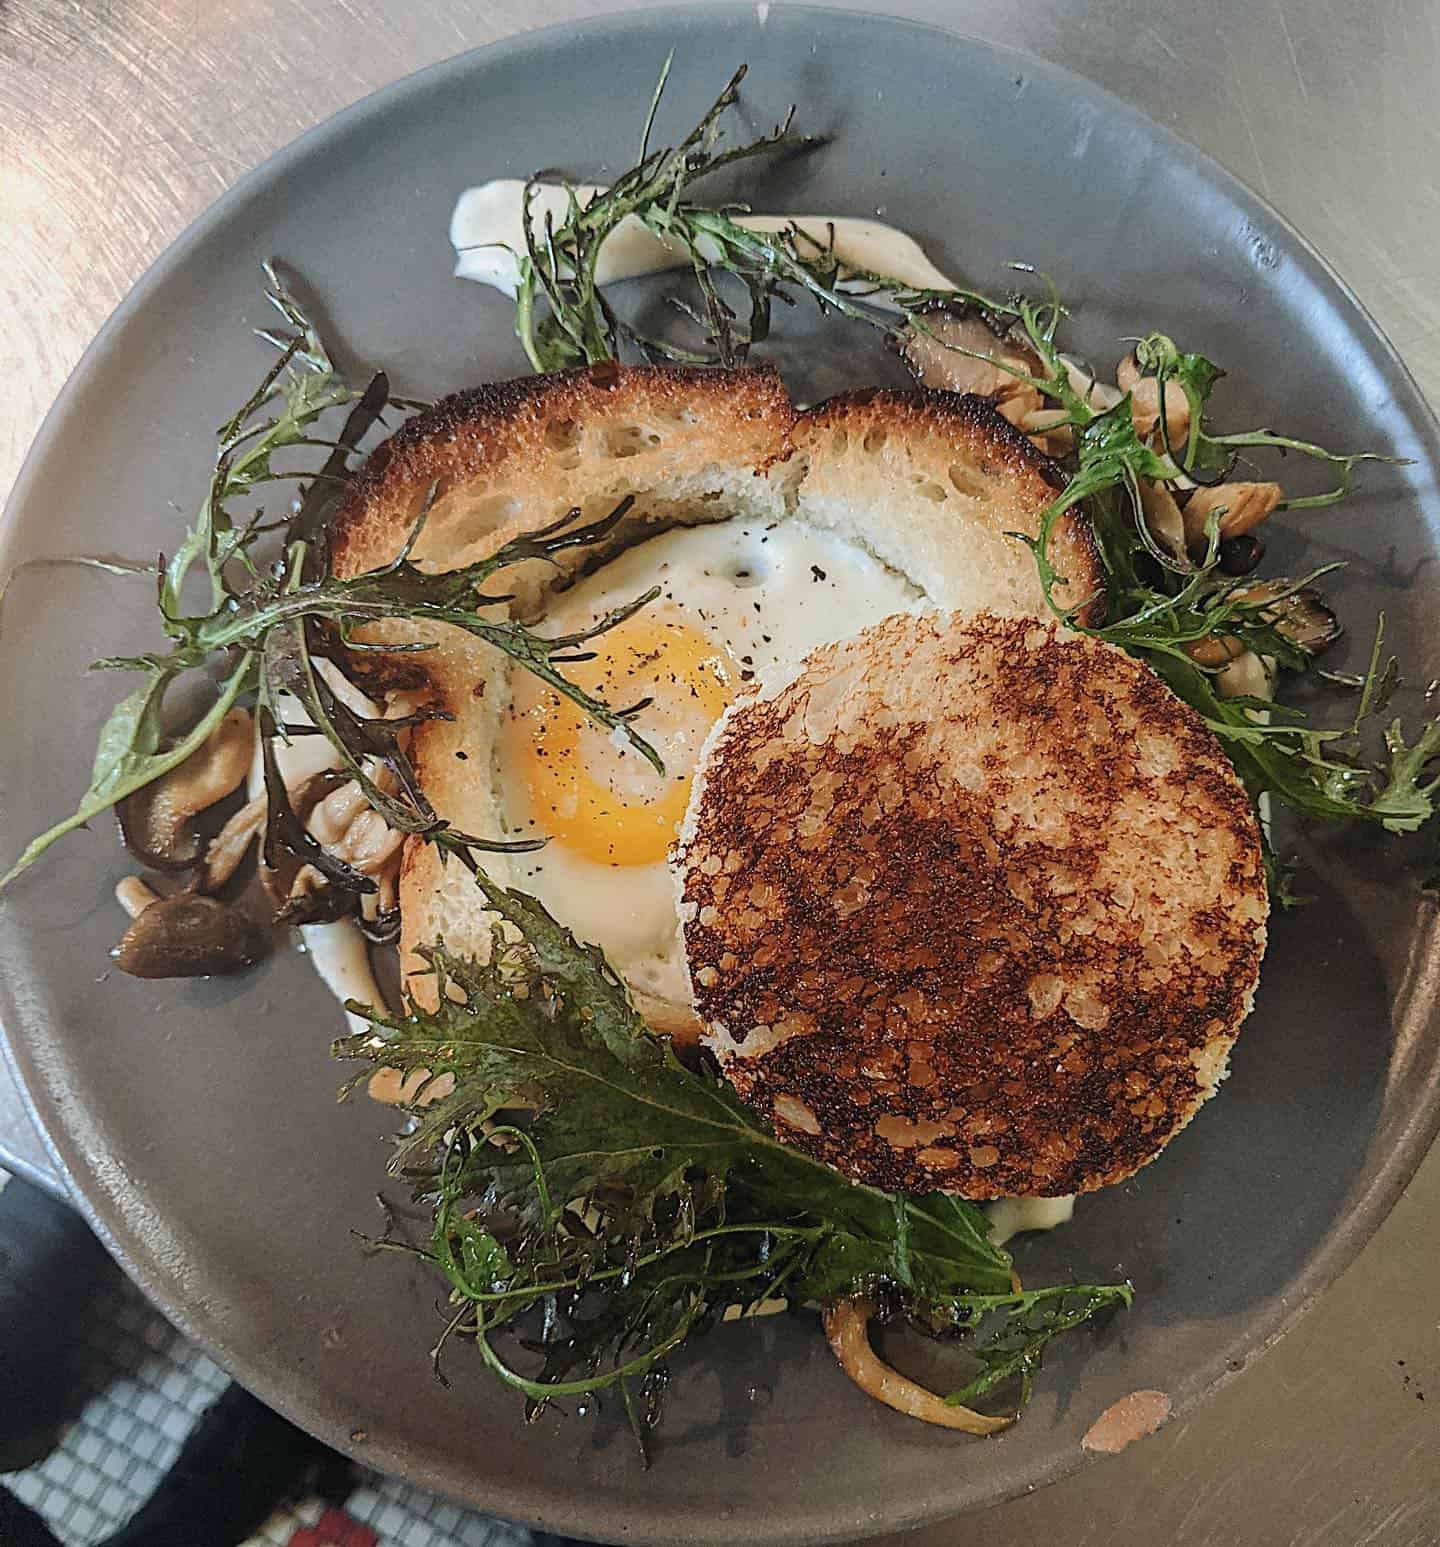 a breakfast plate with toast, eggs, and greens